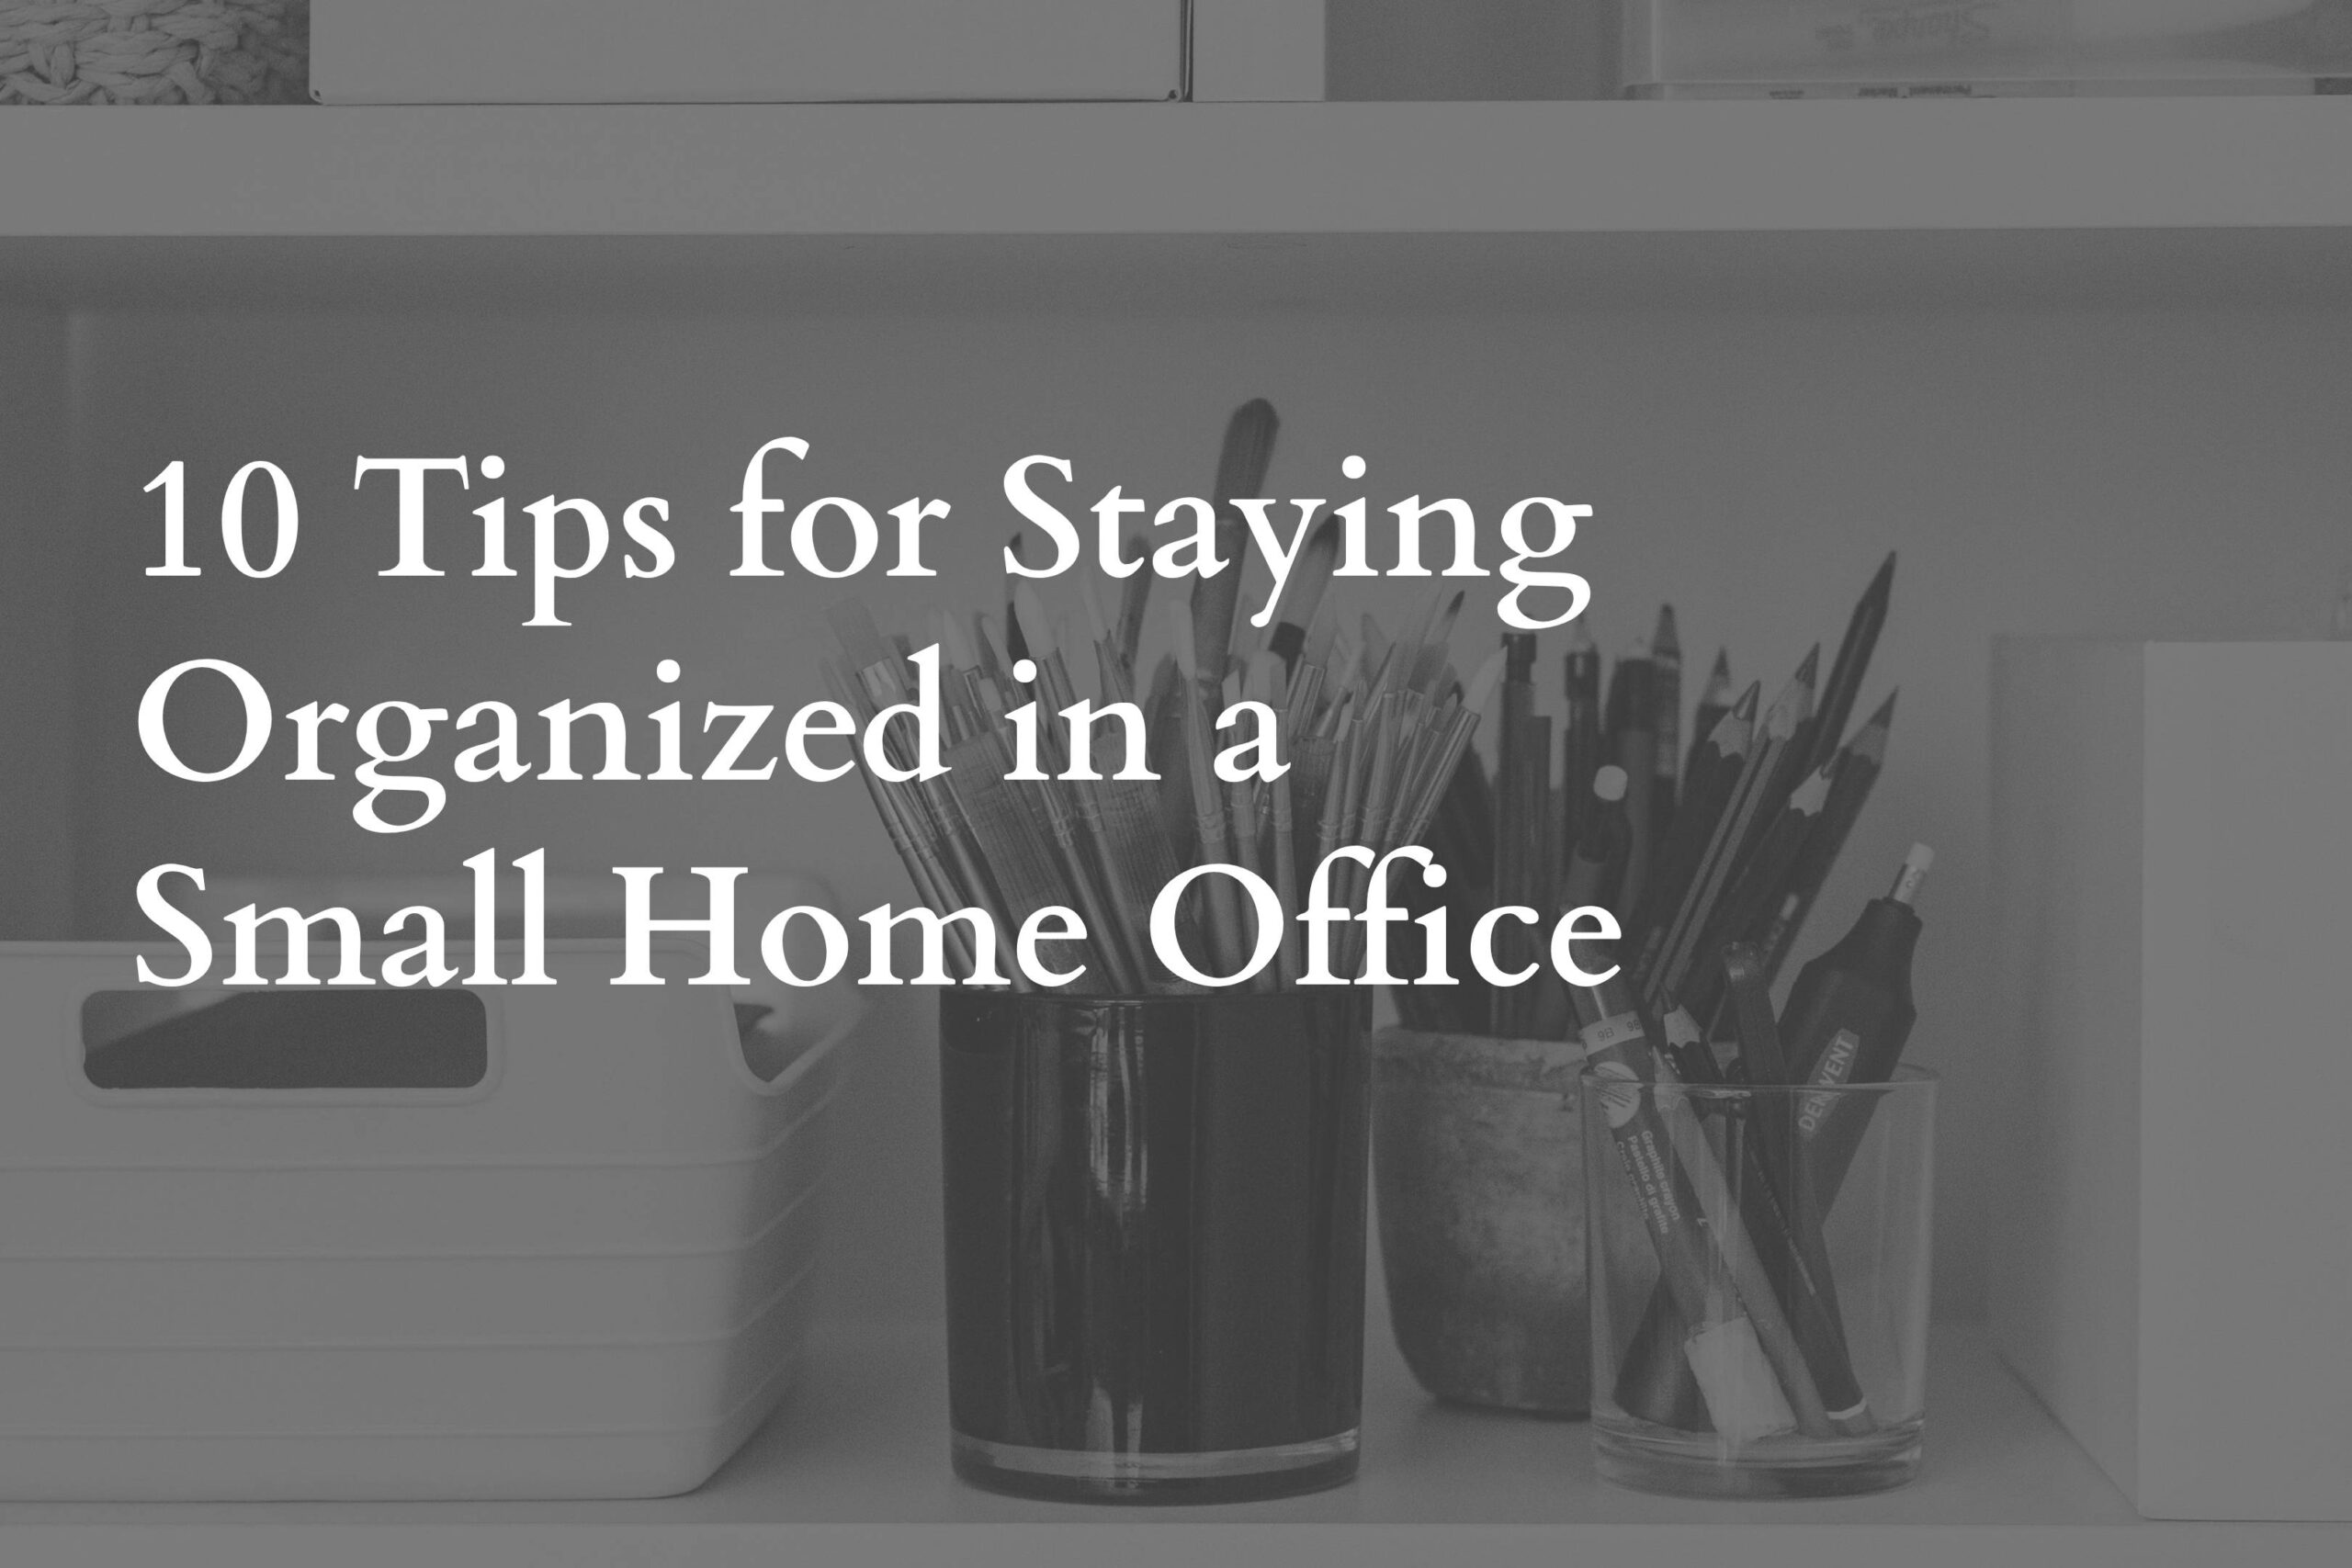 10 Tips for Staying Organized in a Small Home Office